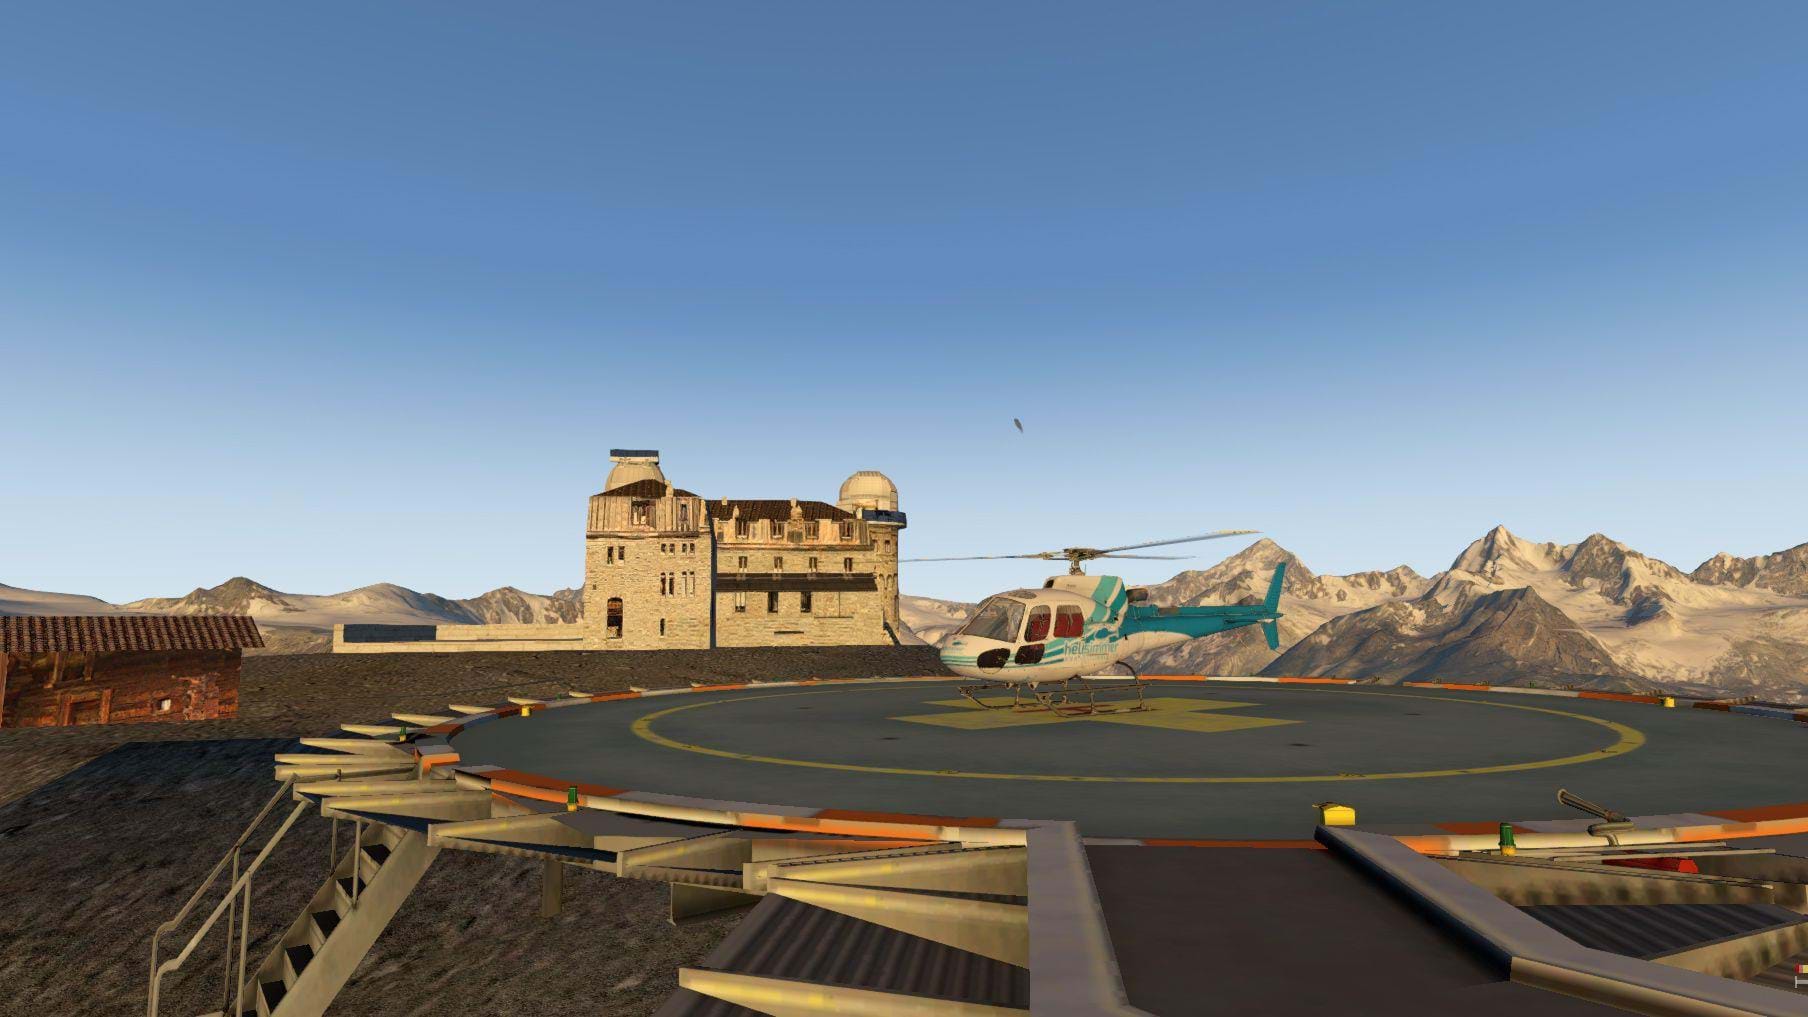 Helicopter simmers are a demanding bunch